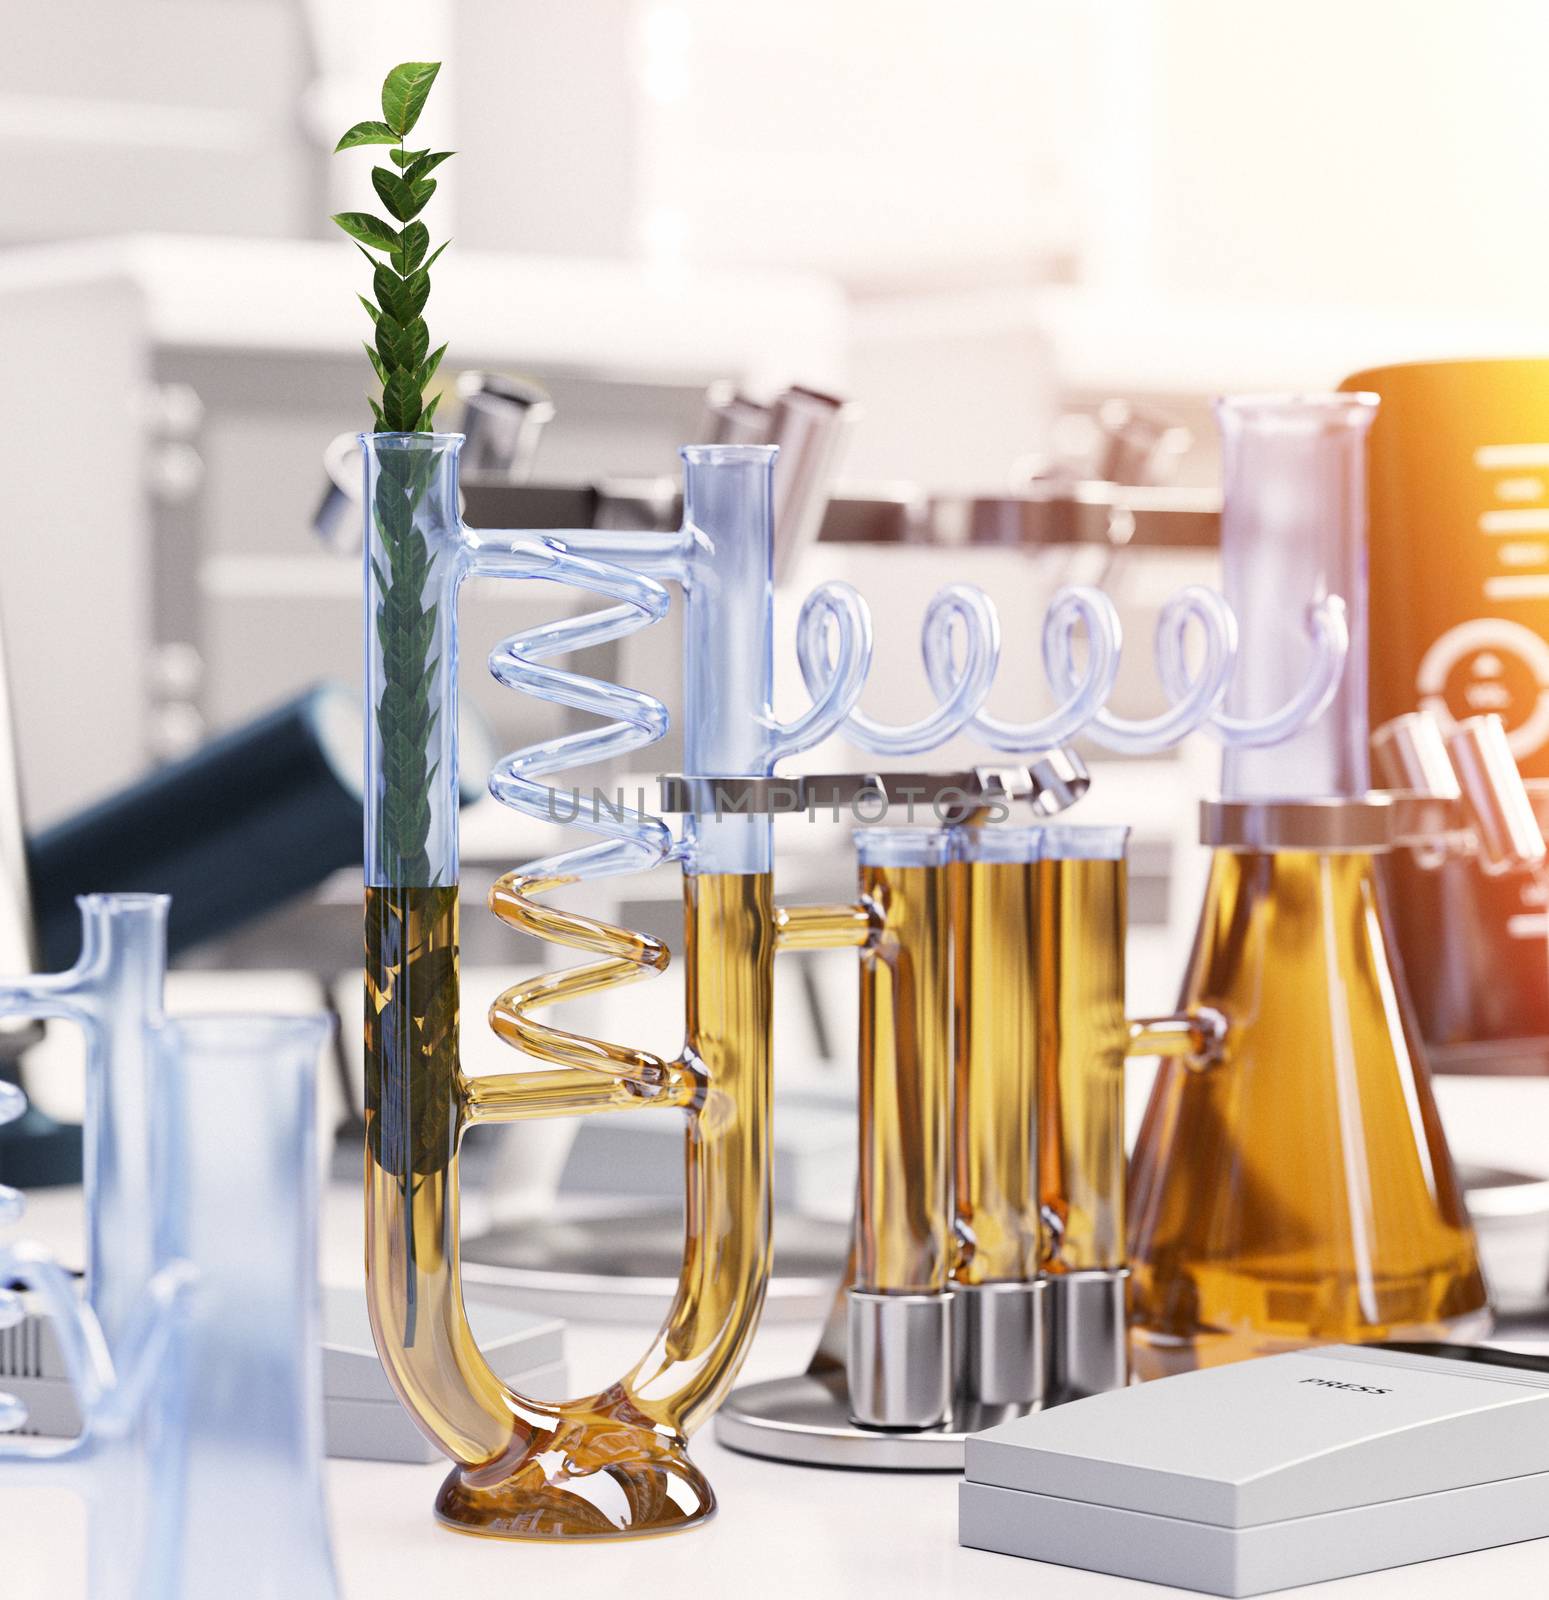 green plant in chemical laboratory science and technology concept background by denisgo